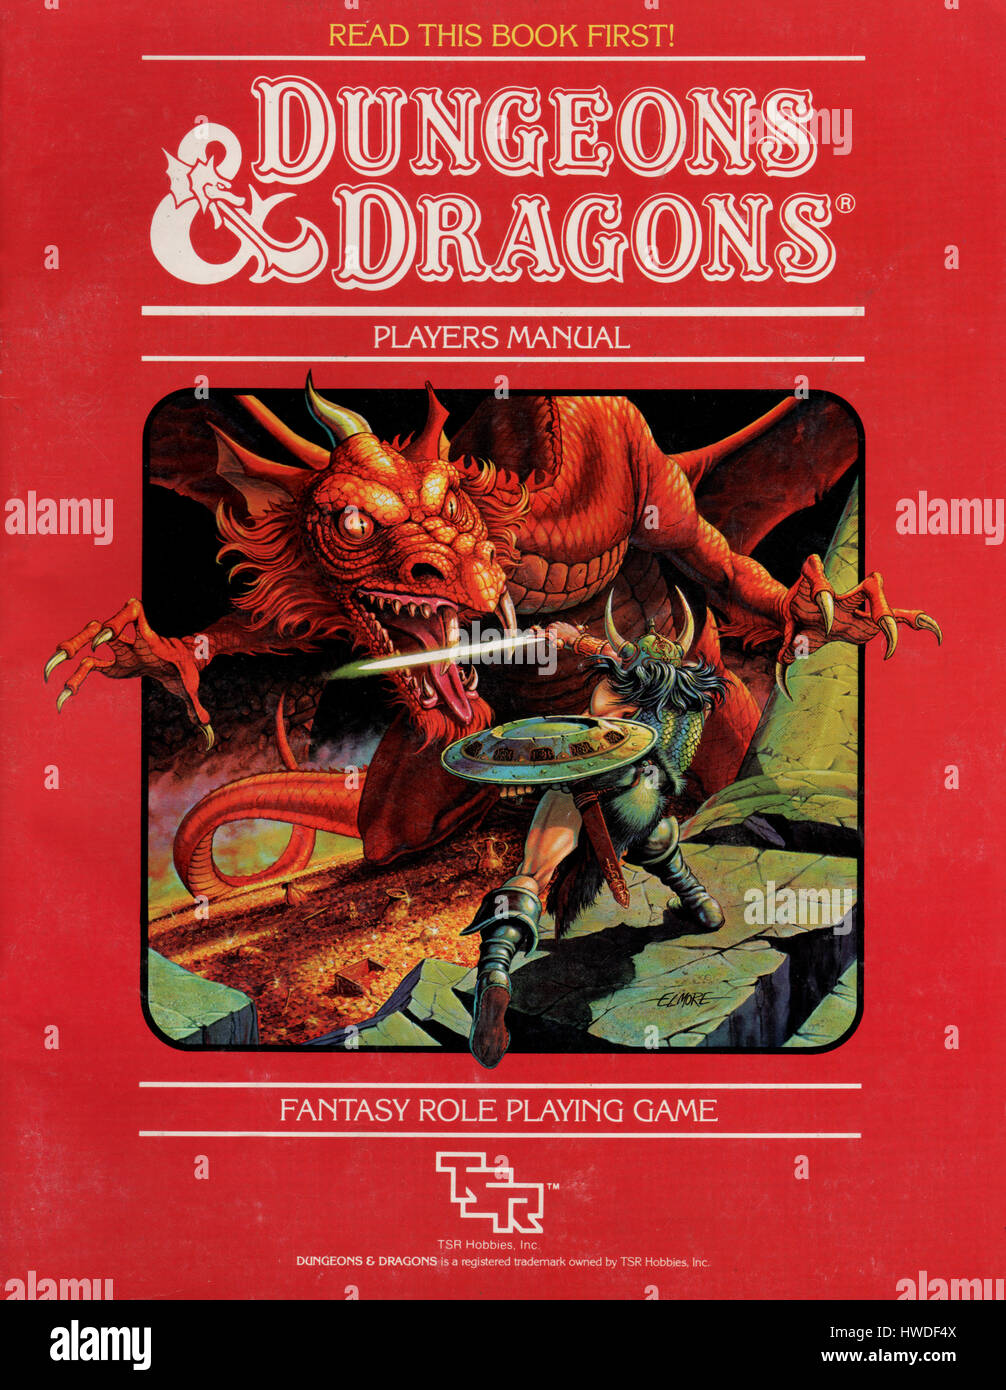 Dungeons and Dragons dungeon players manual book published as part of a